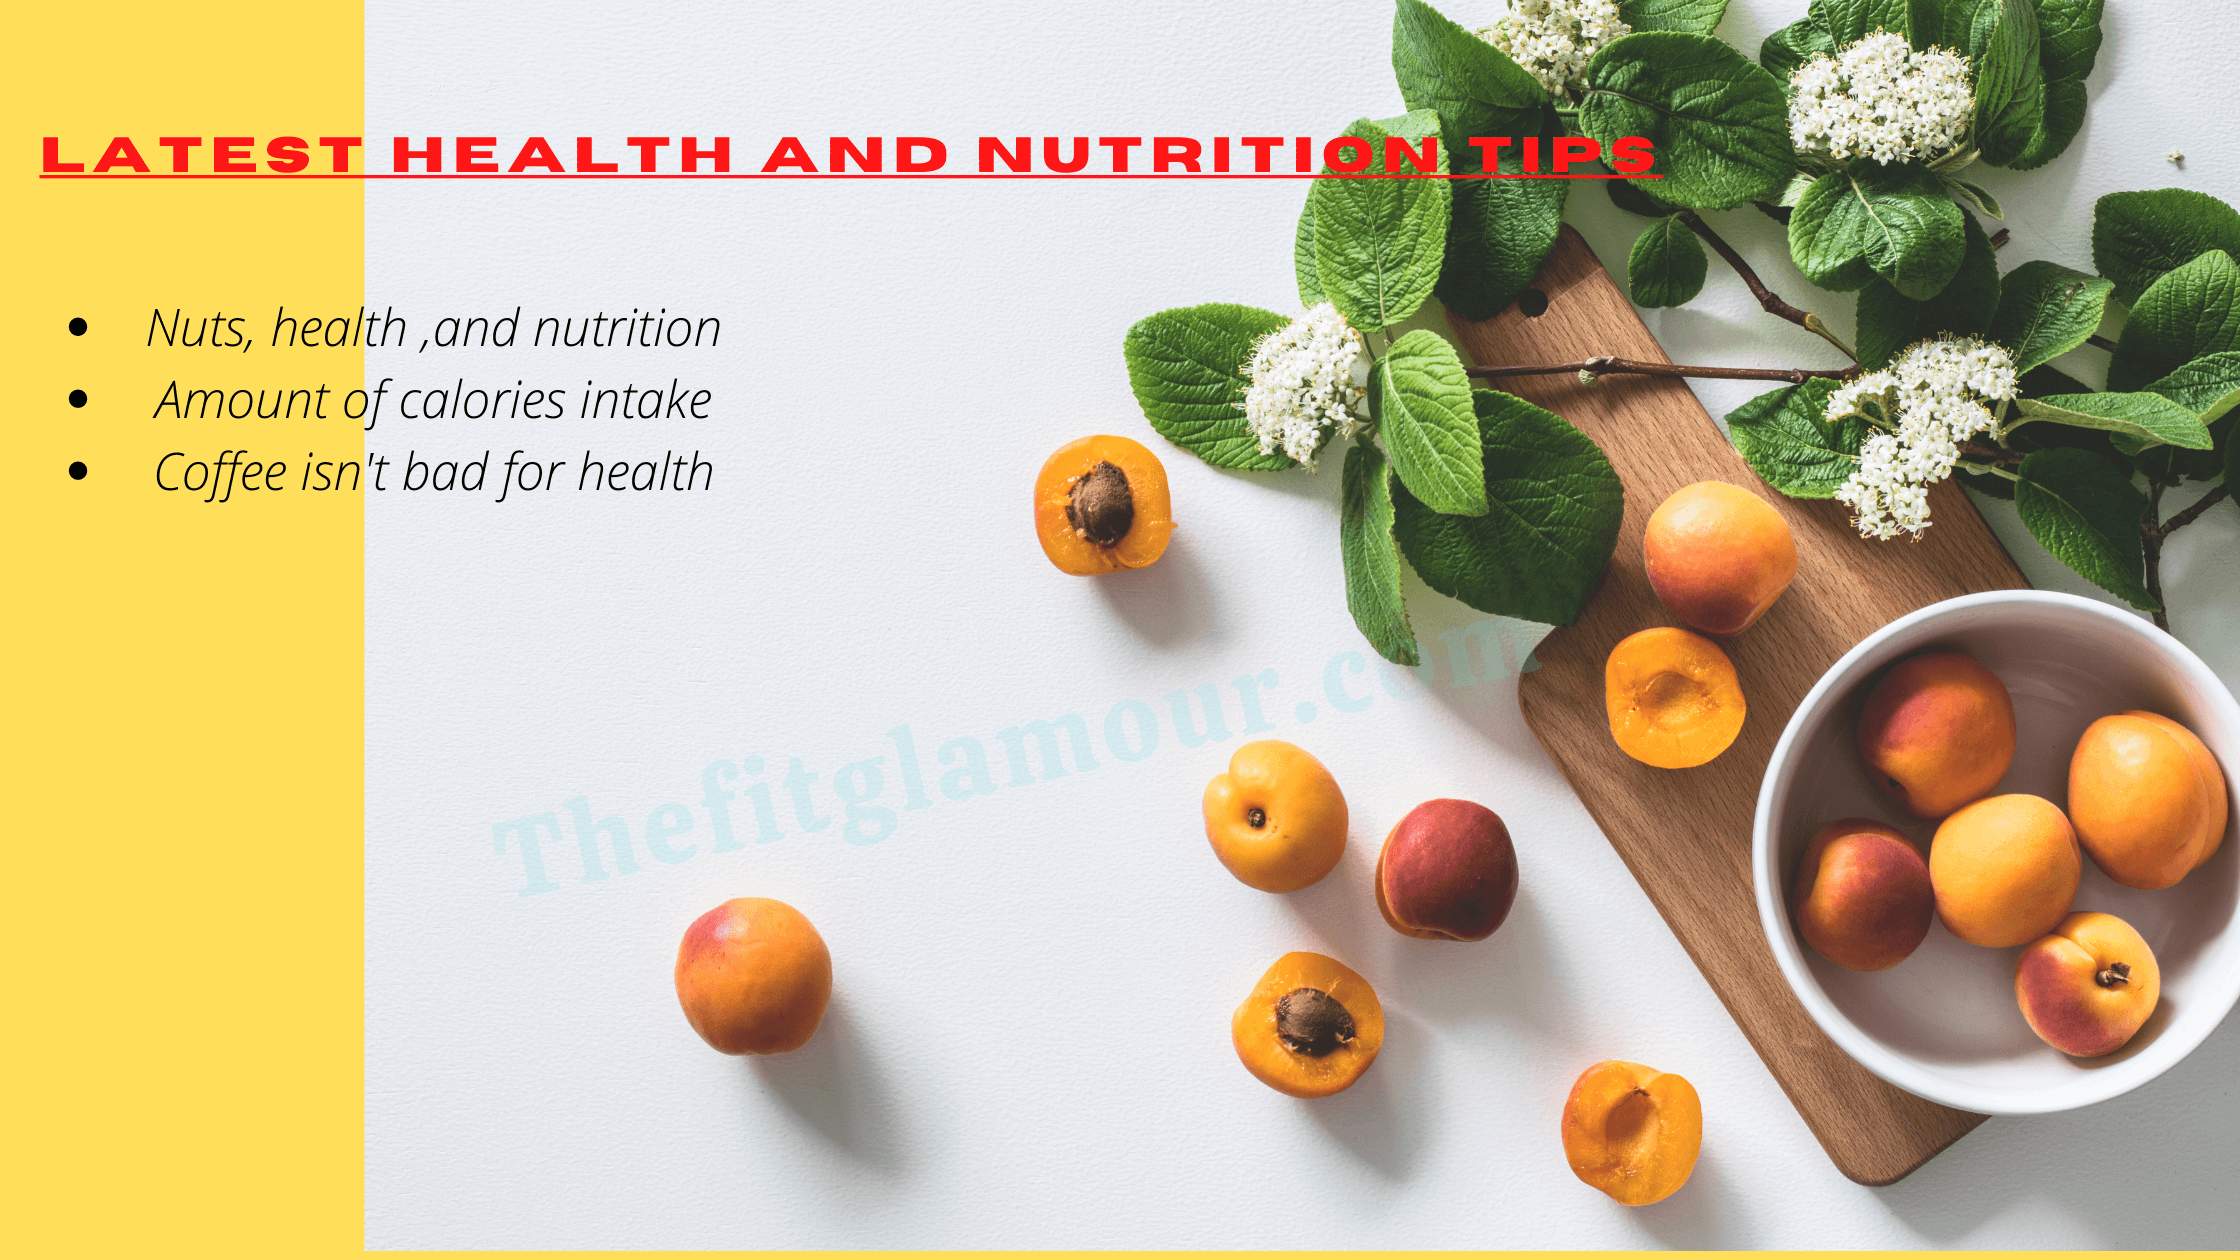 Latest health and nutrition tips 2020